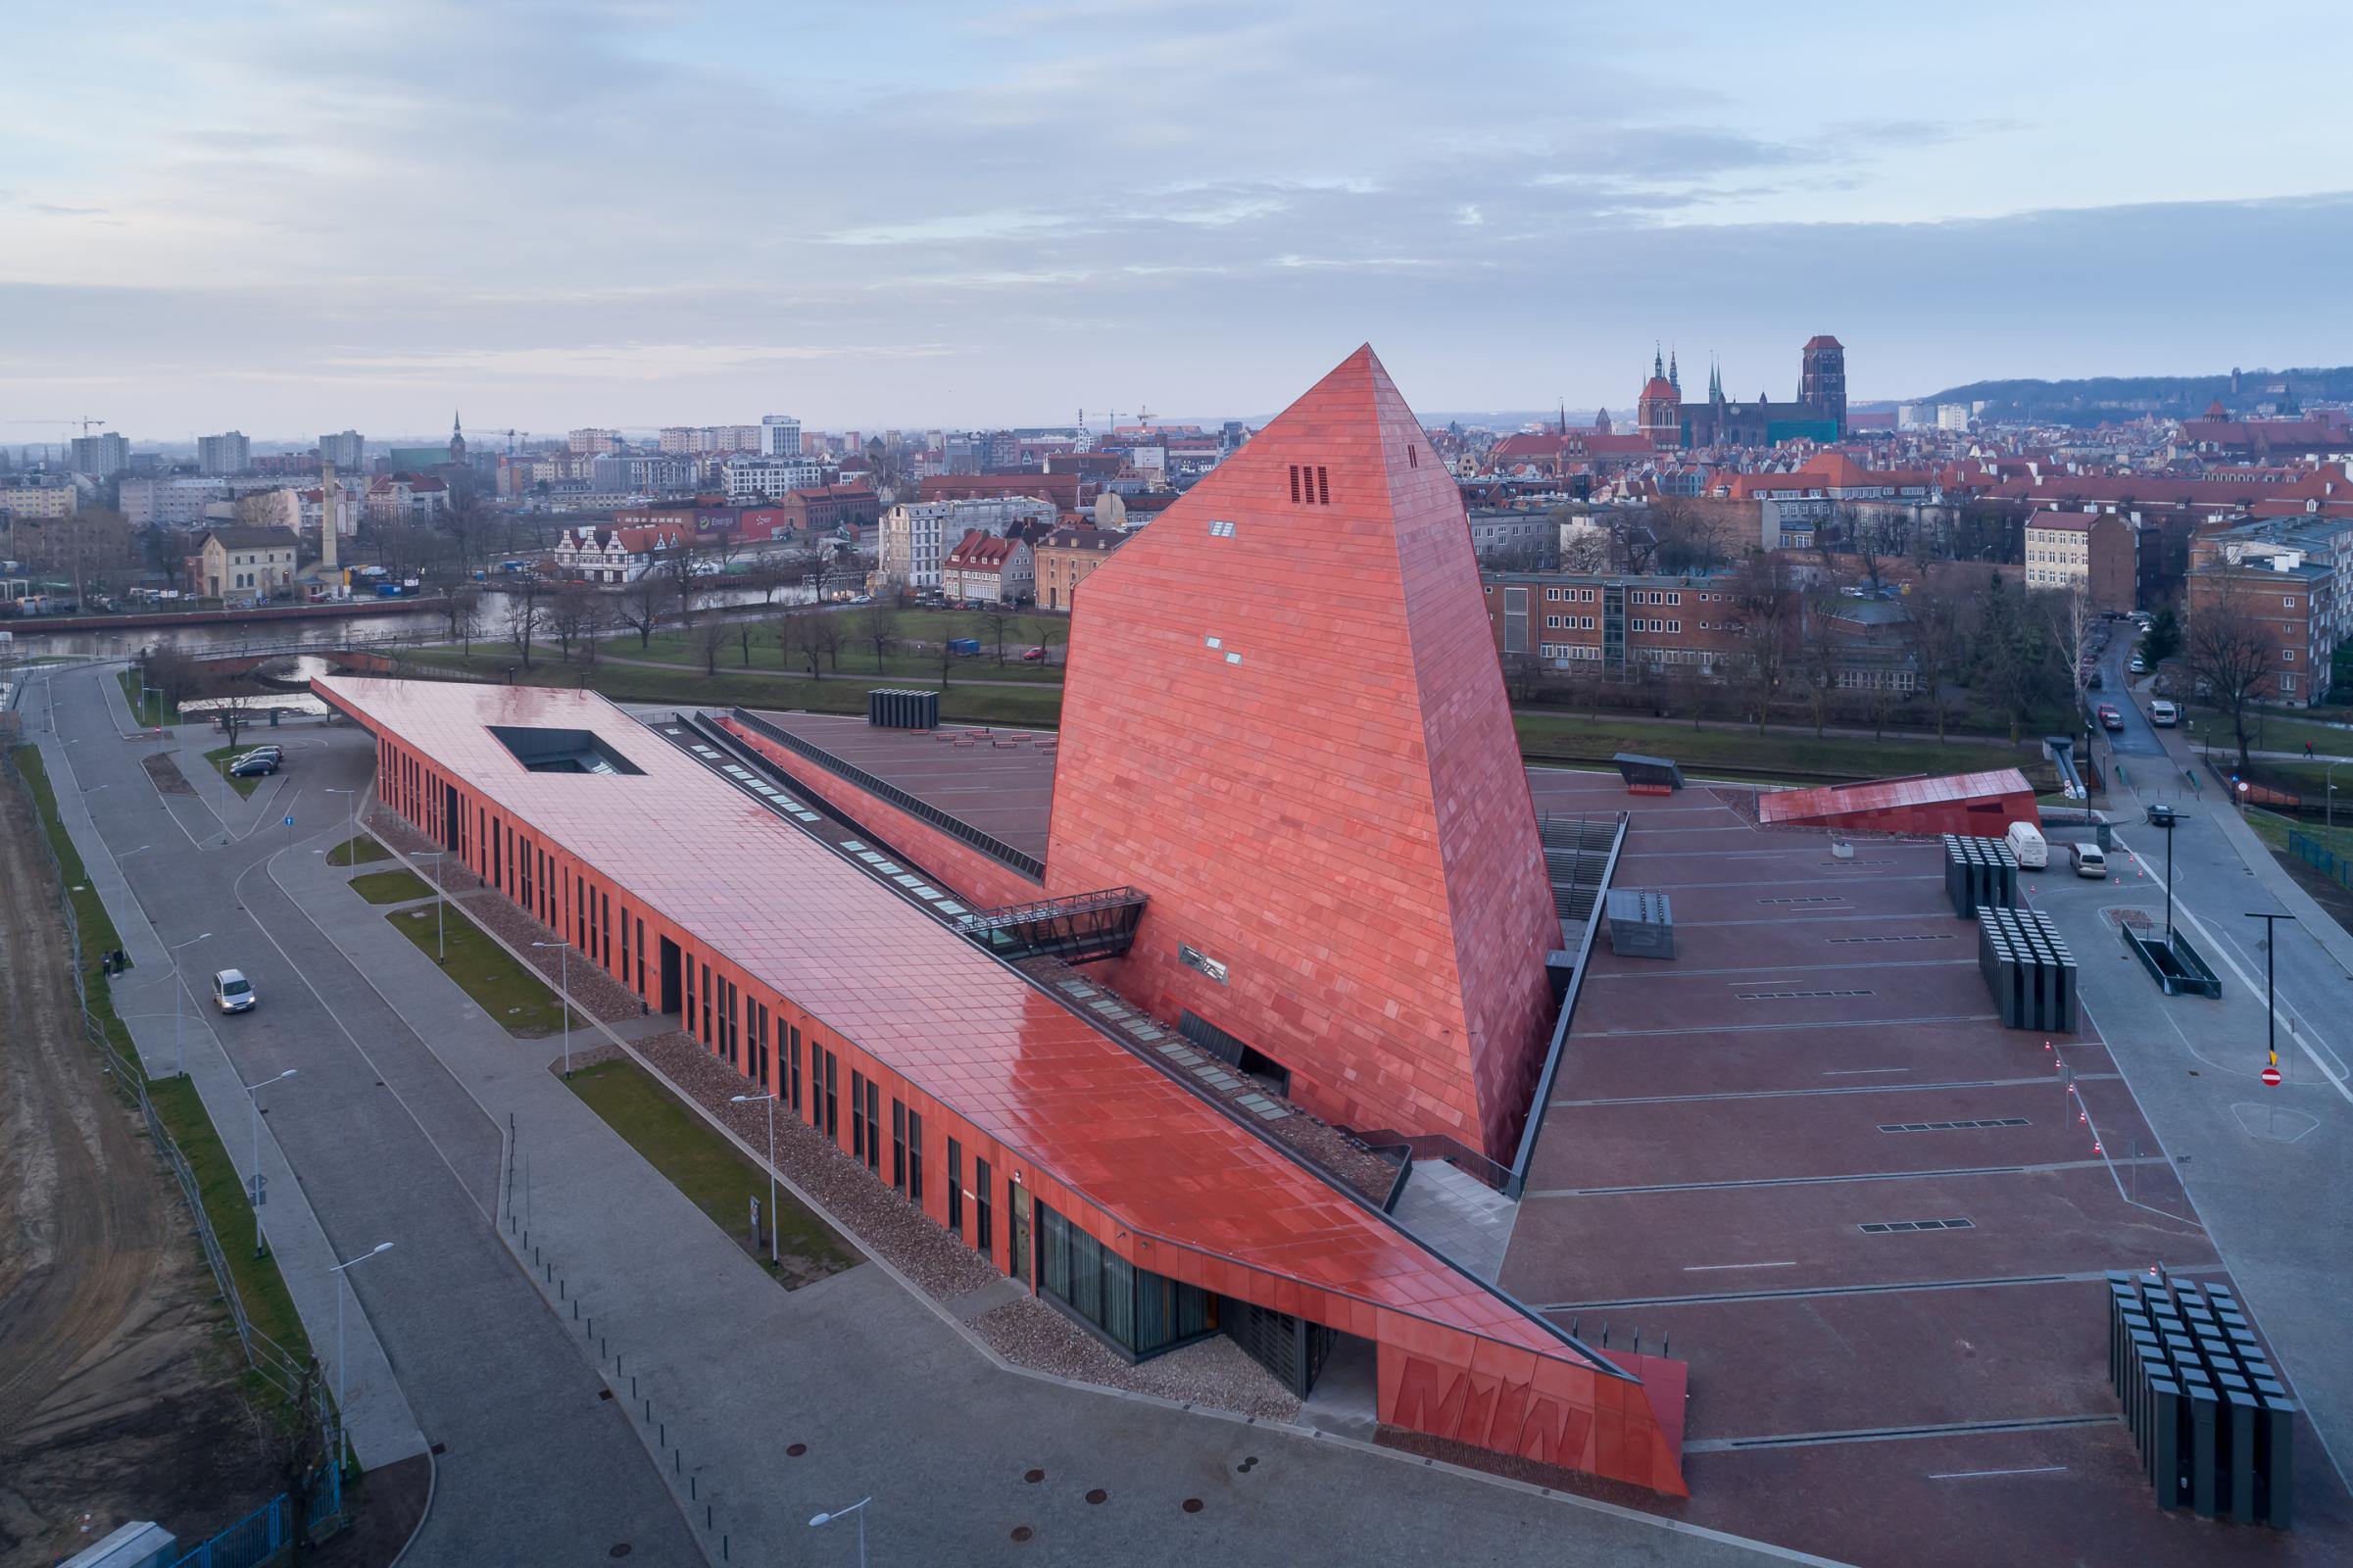 Photograph of Museum of the Second World War, designed by Kwadrat Studio Architektoniczne and located in Gdańsk, Poland